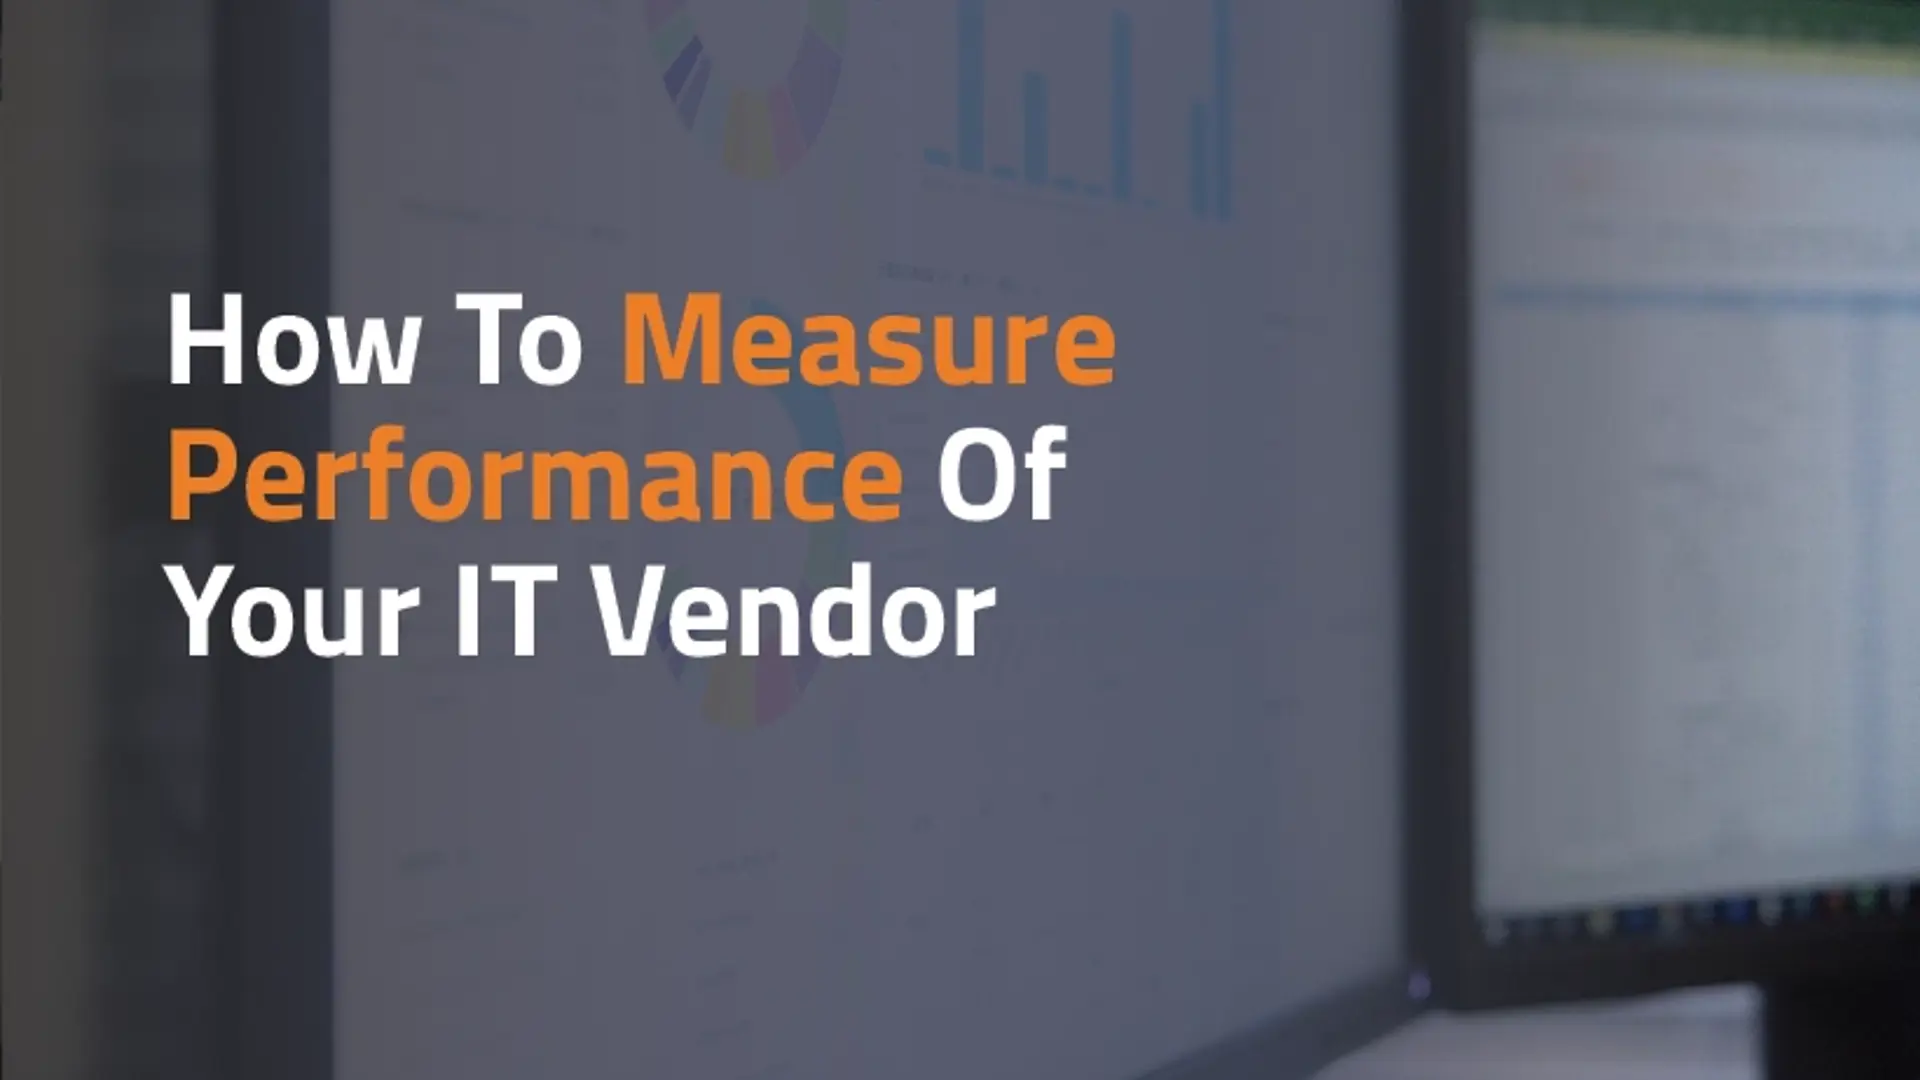 Measuring performance of an IT vendor